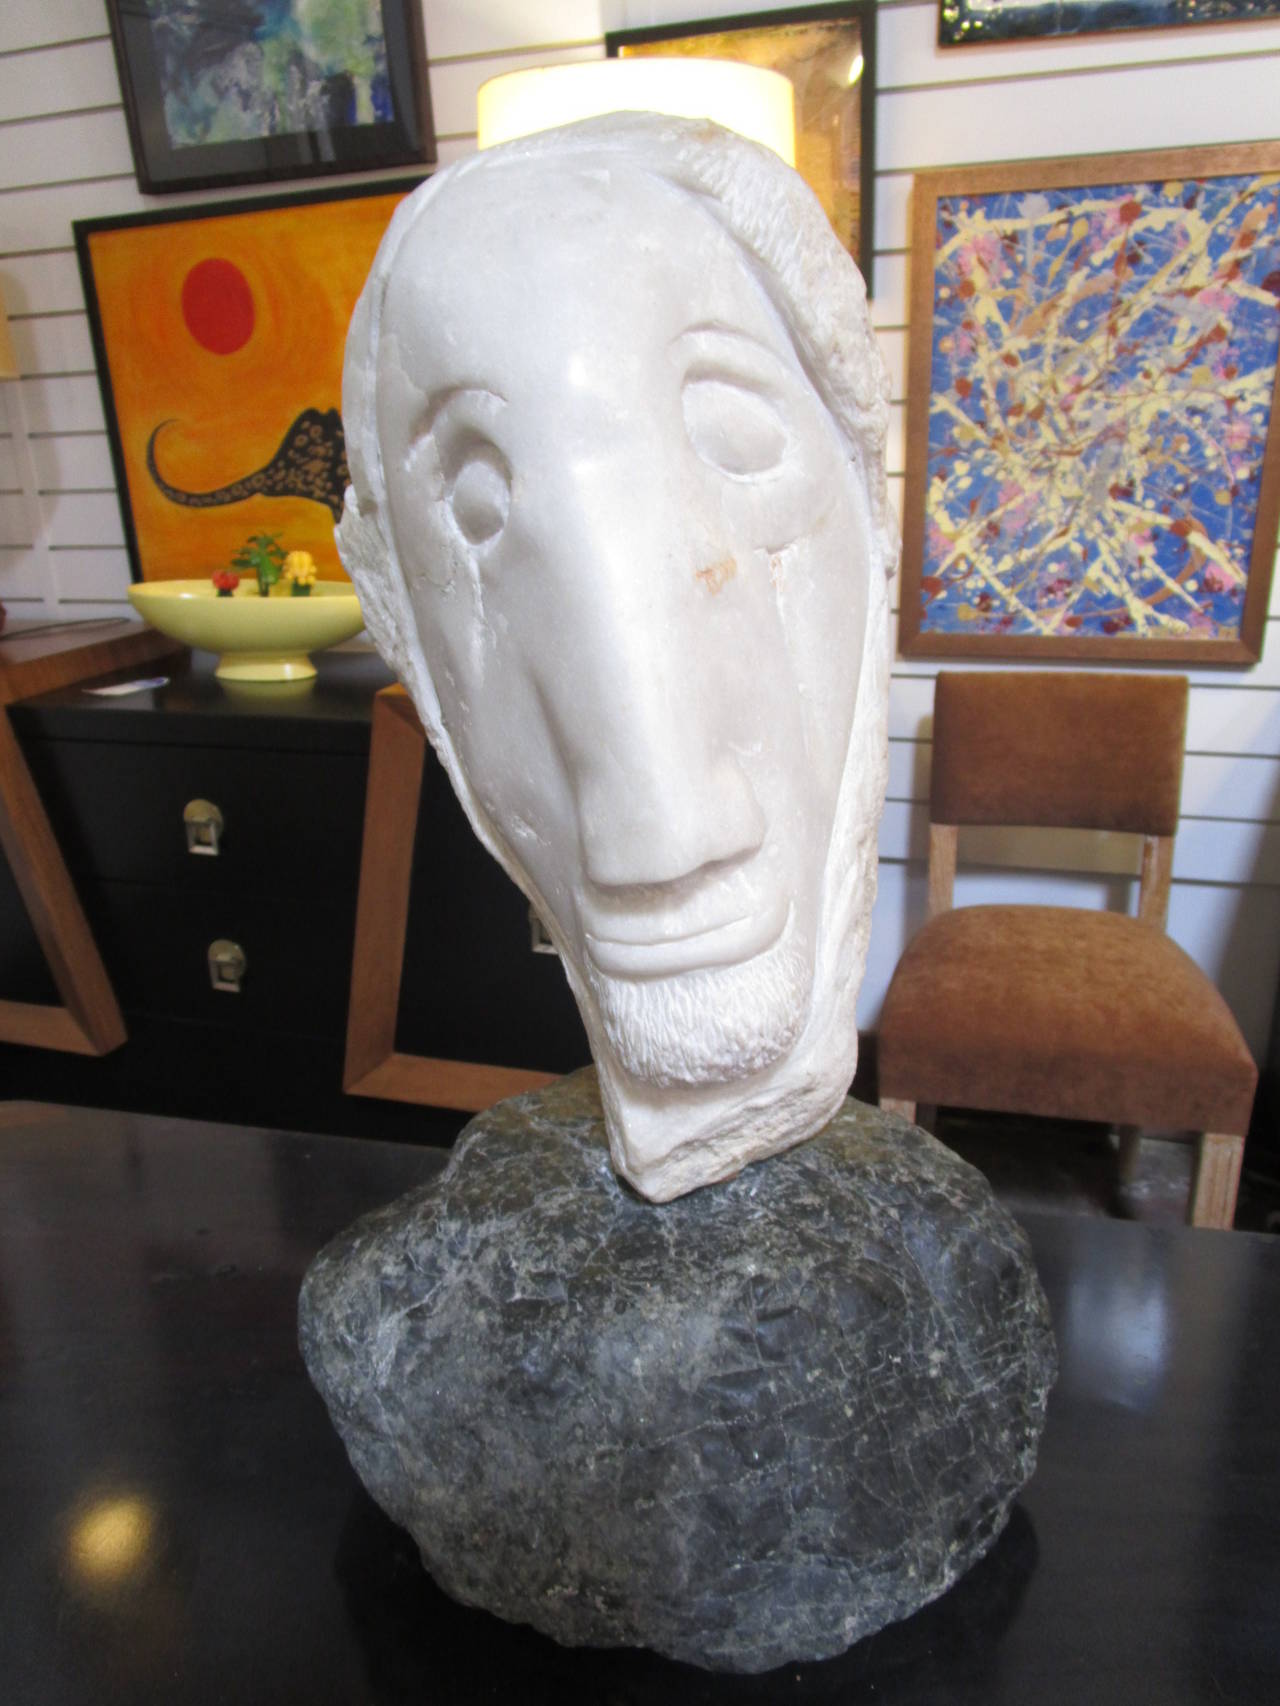 This sculpture is strong by the way it is carved, sharp cuts, the material which is two beautiful pieces of marble, one white and one black and the expression of this man's face.
It is signed Flynn Cody and dated 1999.